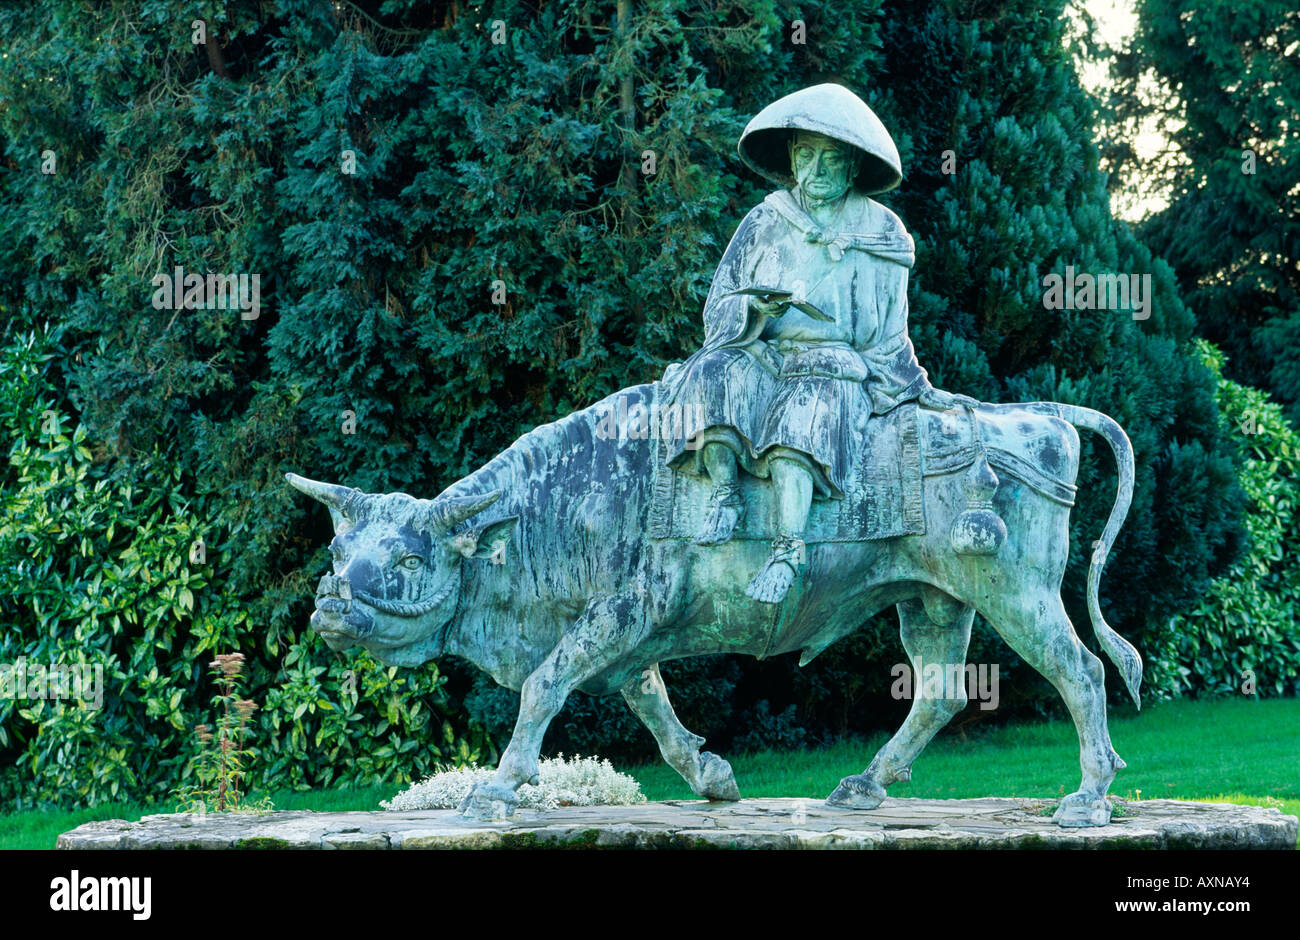 Bronze statue of ancient Chinese Taoist philosopher Lao Tzu riding an ox in Duffryn Gardens, South Glamorgan, Wales, UK Stock Photo